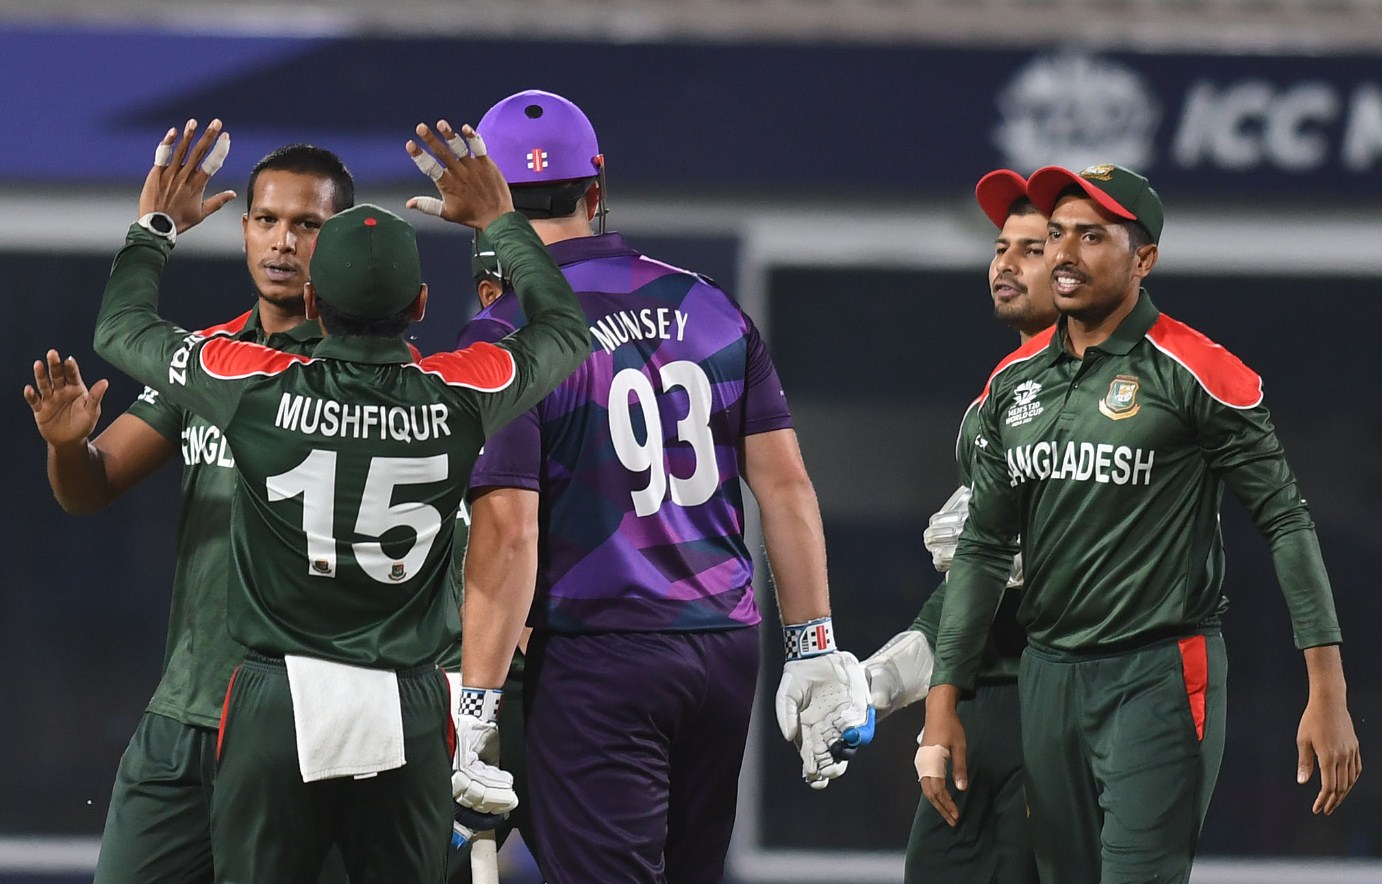 Mohammad Saifuddin takes the first wicket for Bangladesh in T20 World Cup 2021, Bangladesh vs Scotland, T20 World Cup 2021